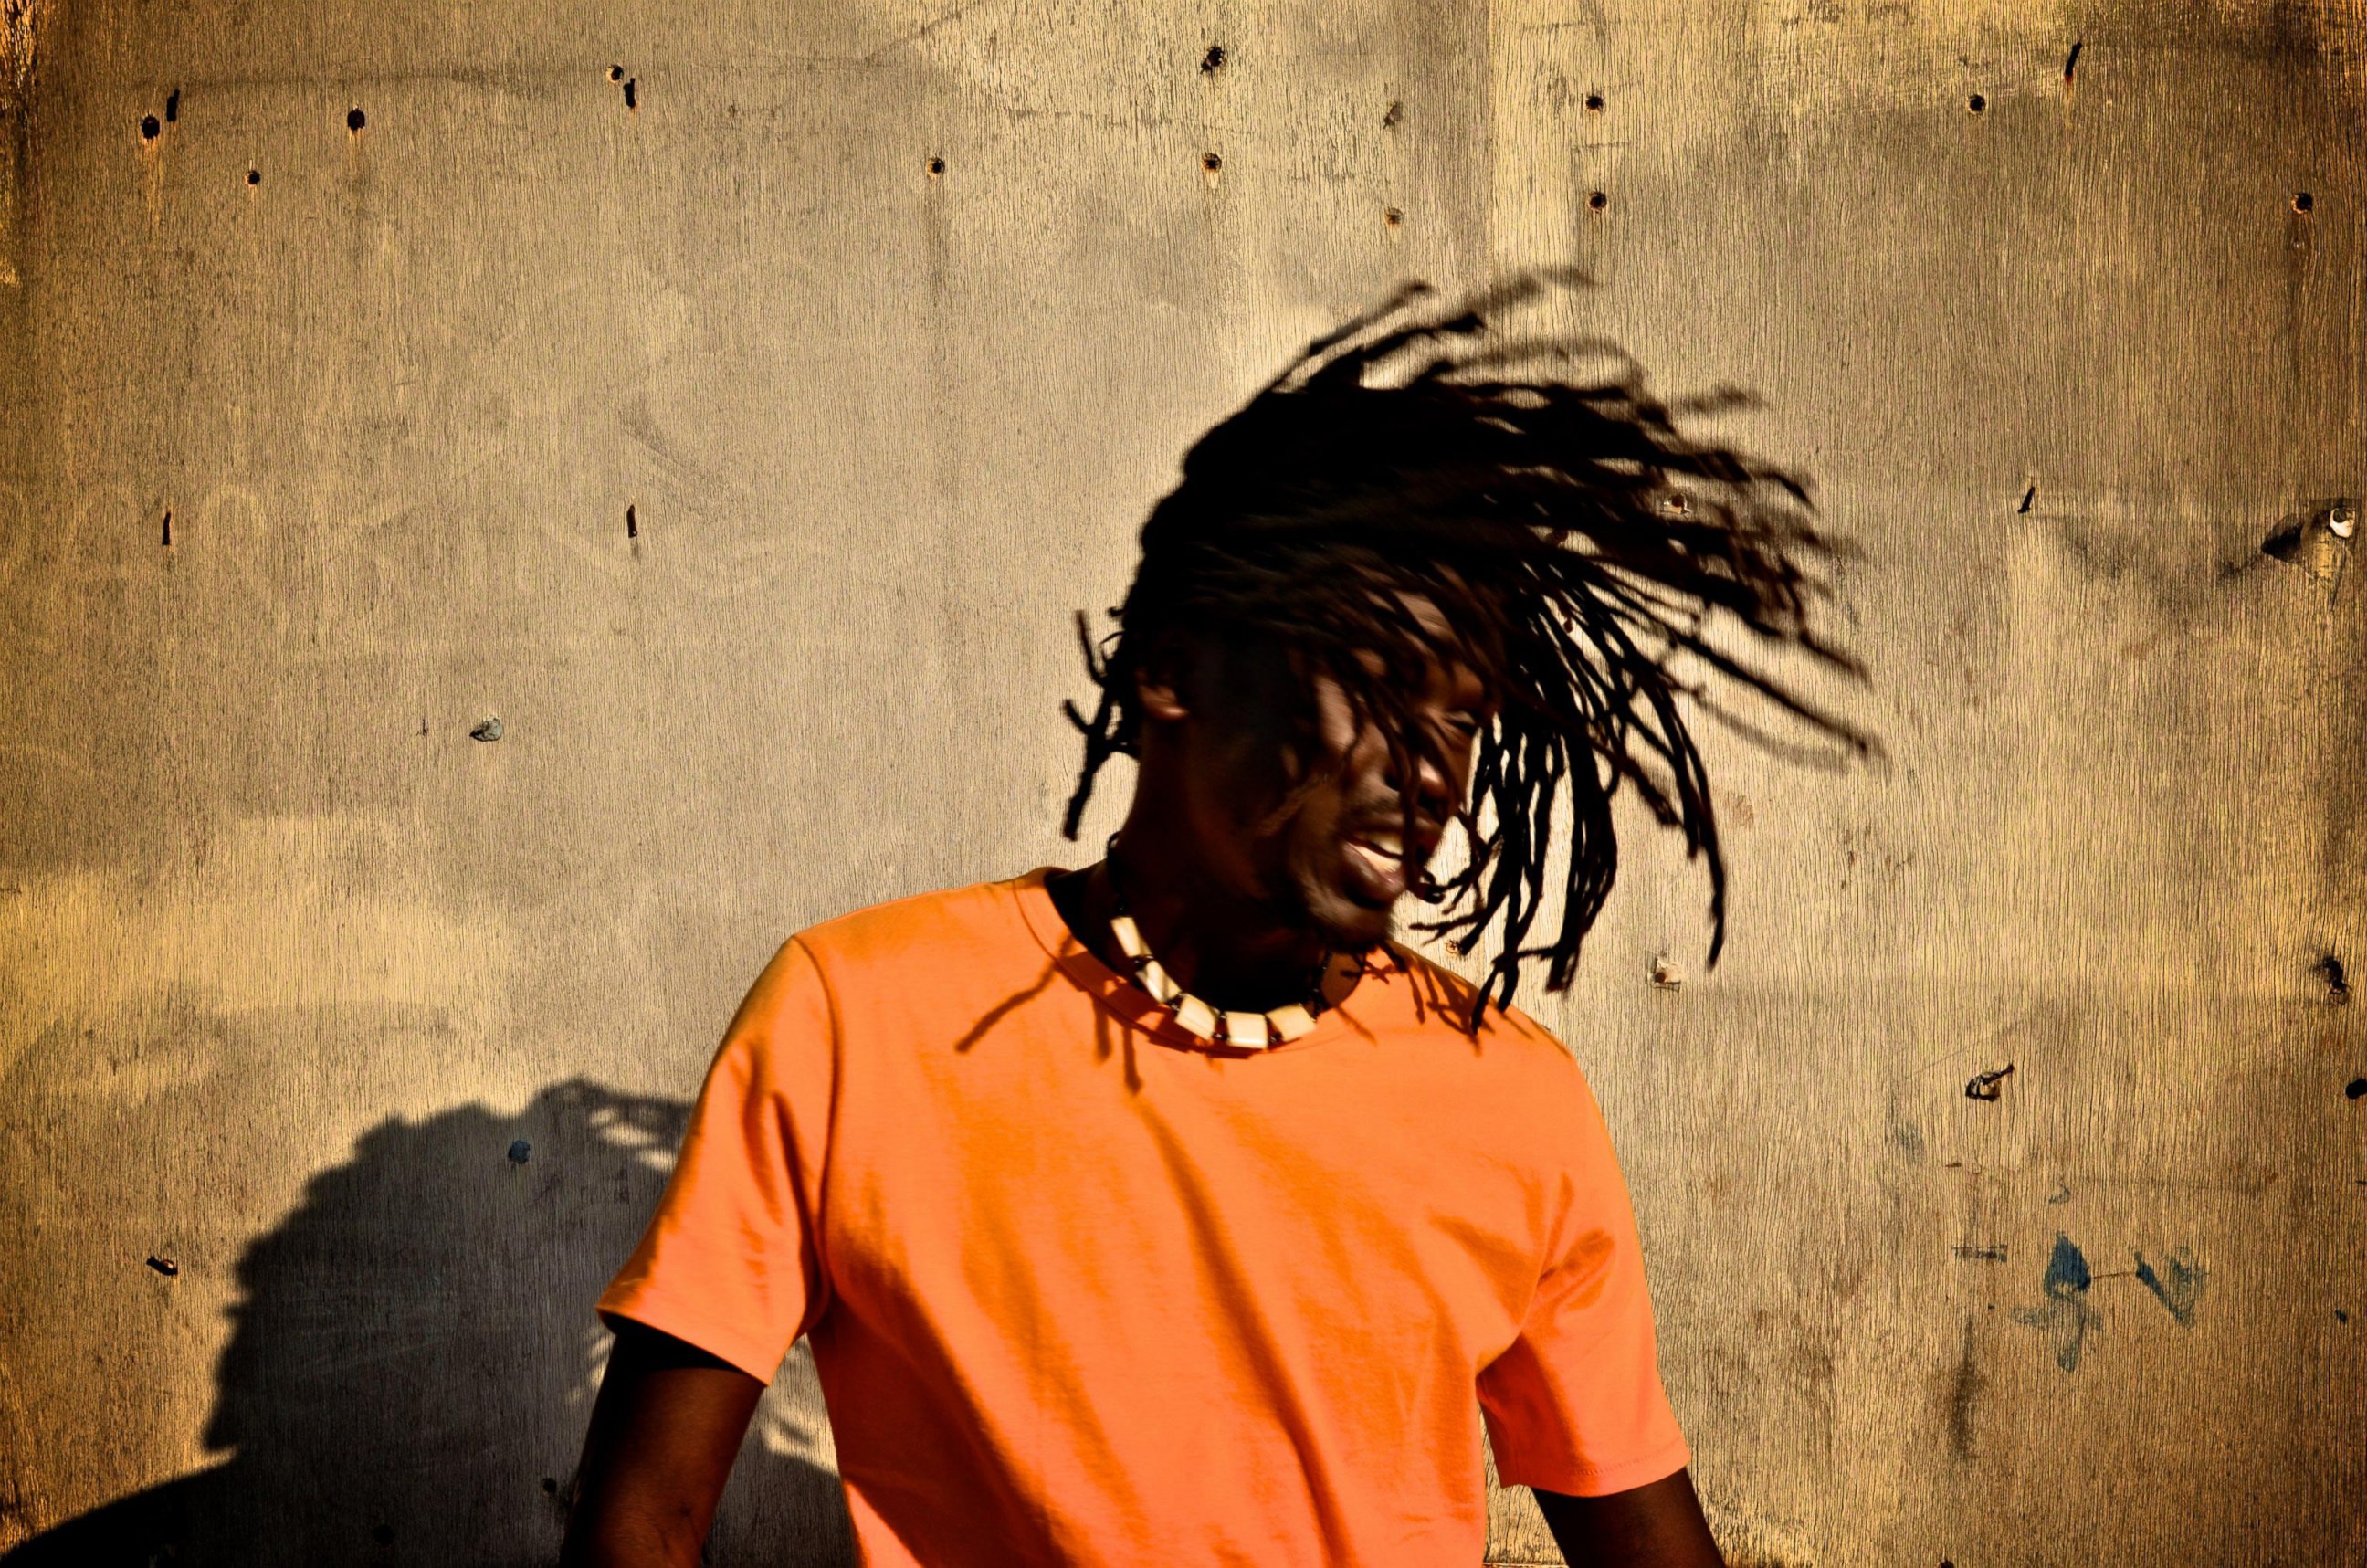 PHOTO: Emmanuel Jal, an escaped Sudanese child soldier, is an acclaimed hip-hop artist and human rights advocate.  He stars in "The Good Lie," which features songs from his album "The Key." 